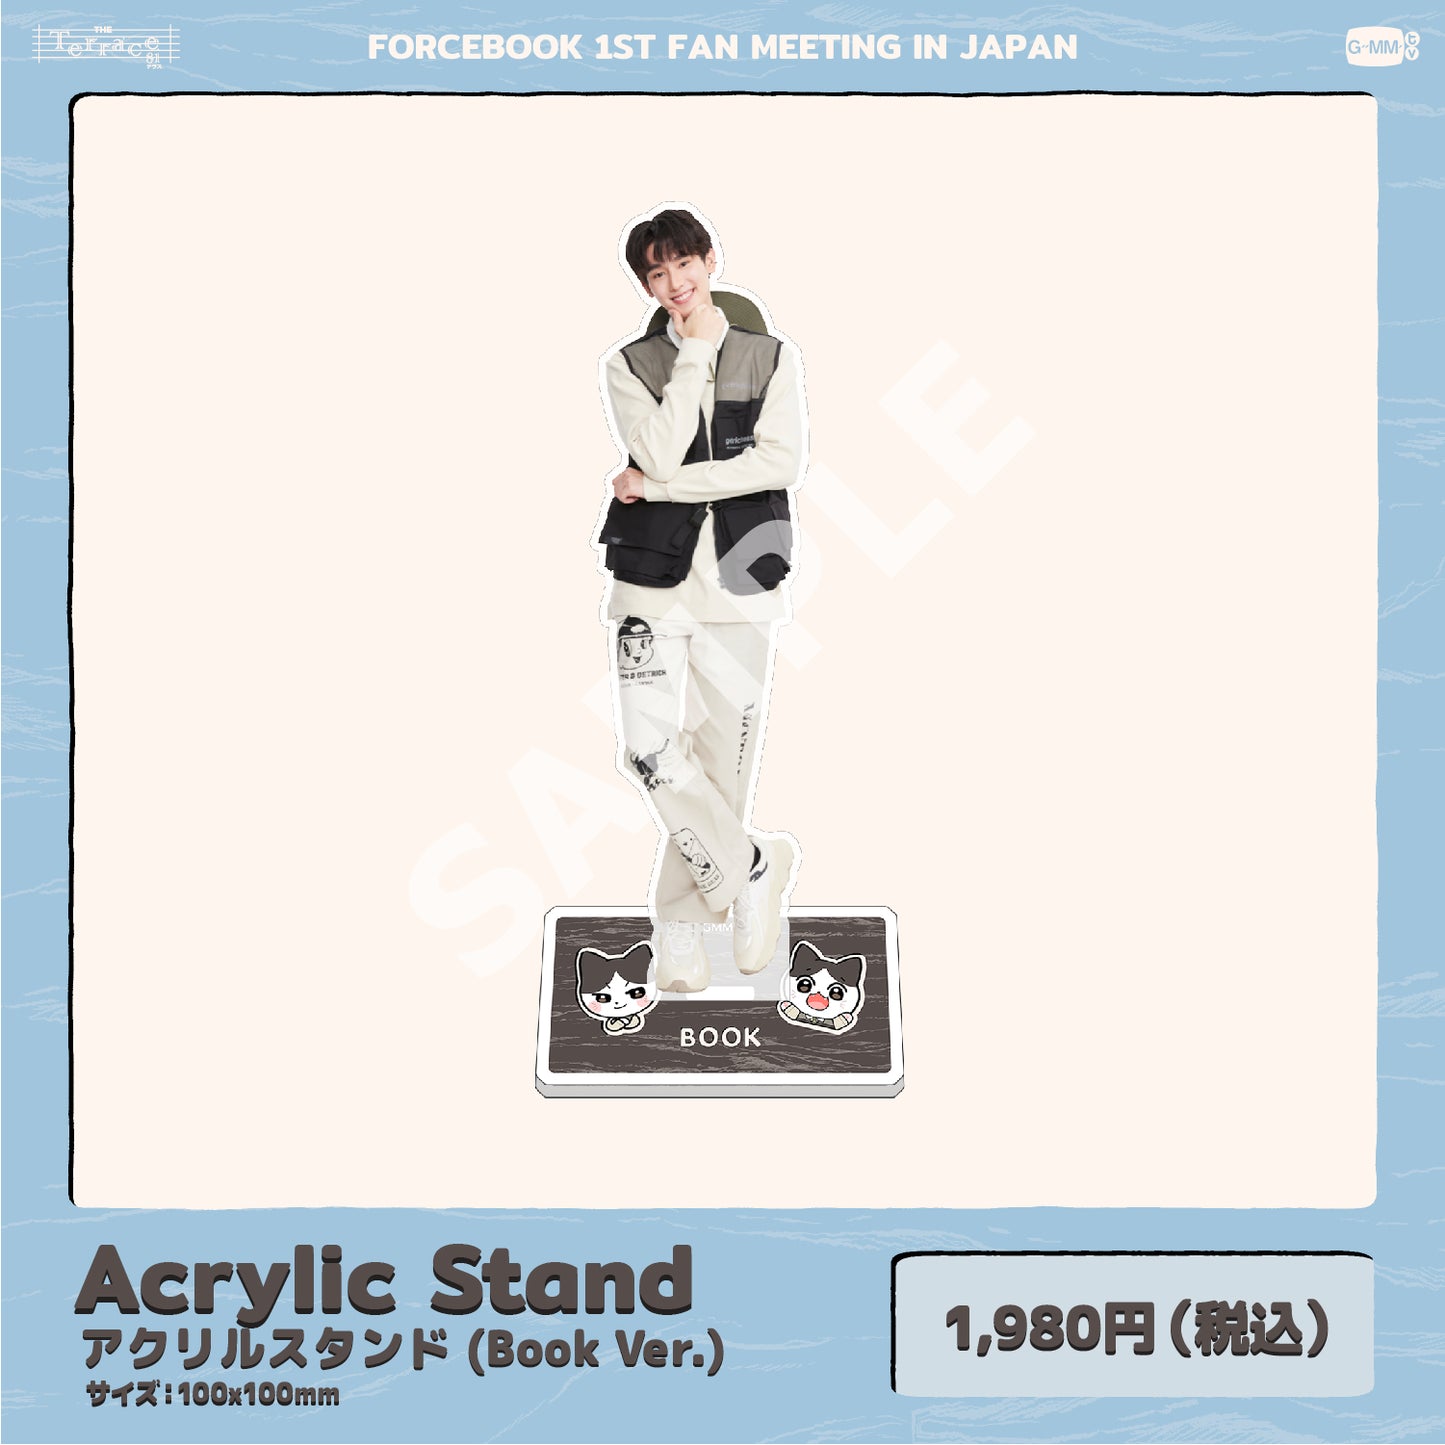 Acrylic Stand 5 (Book Ver.)